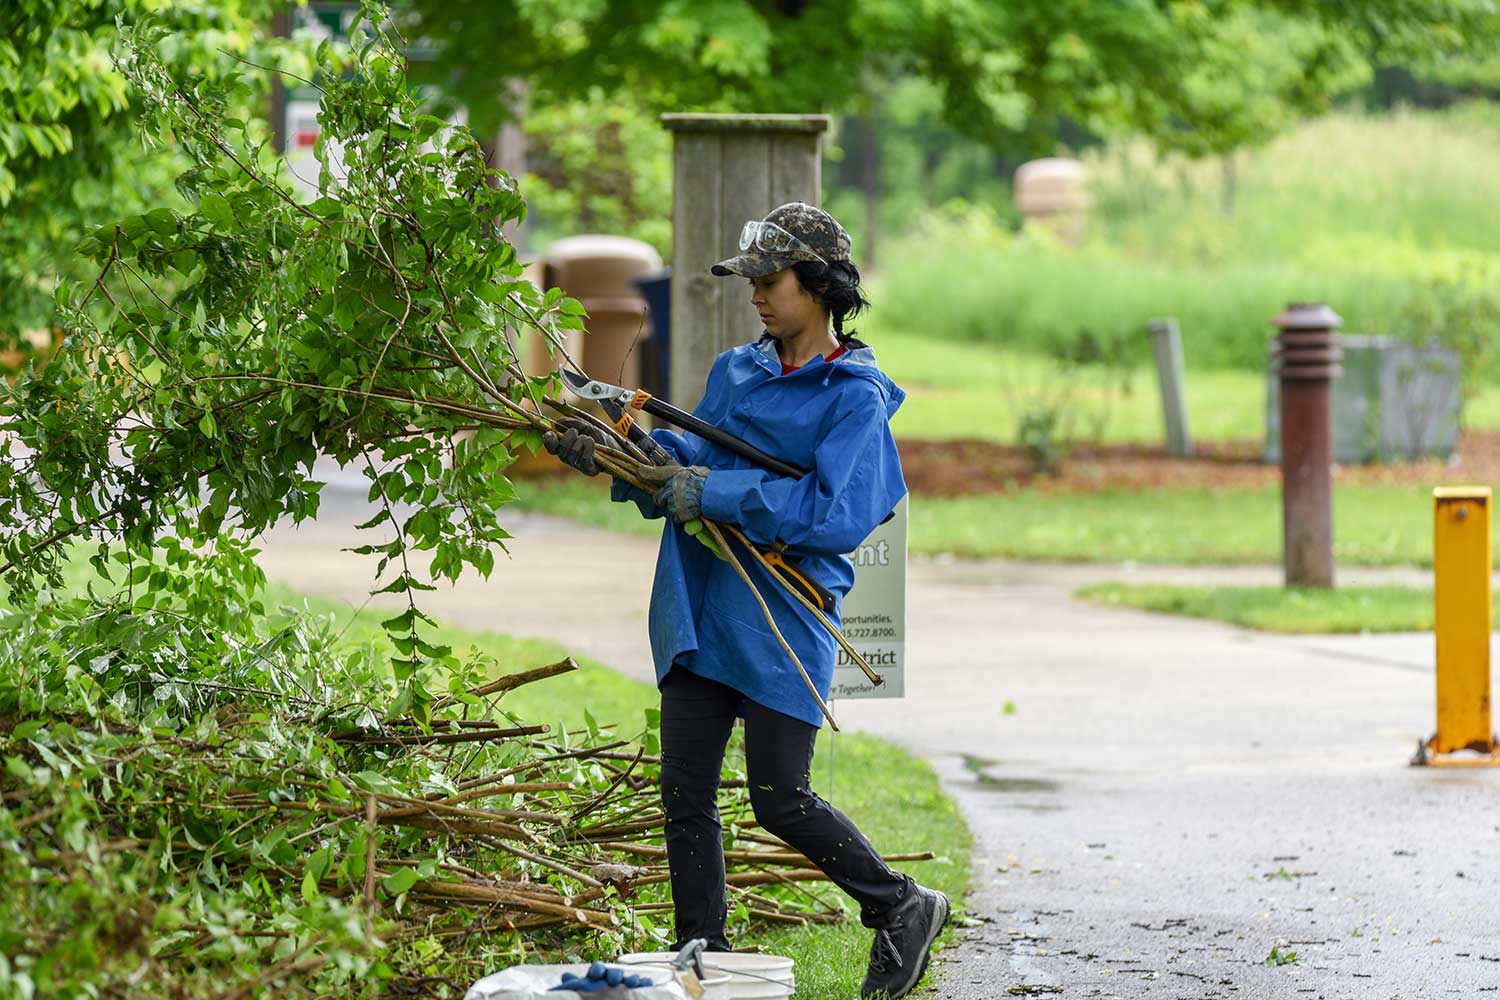 A person carrying loppers and cut brush while working alongside a paved trail.